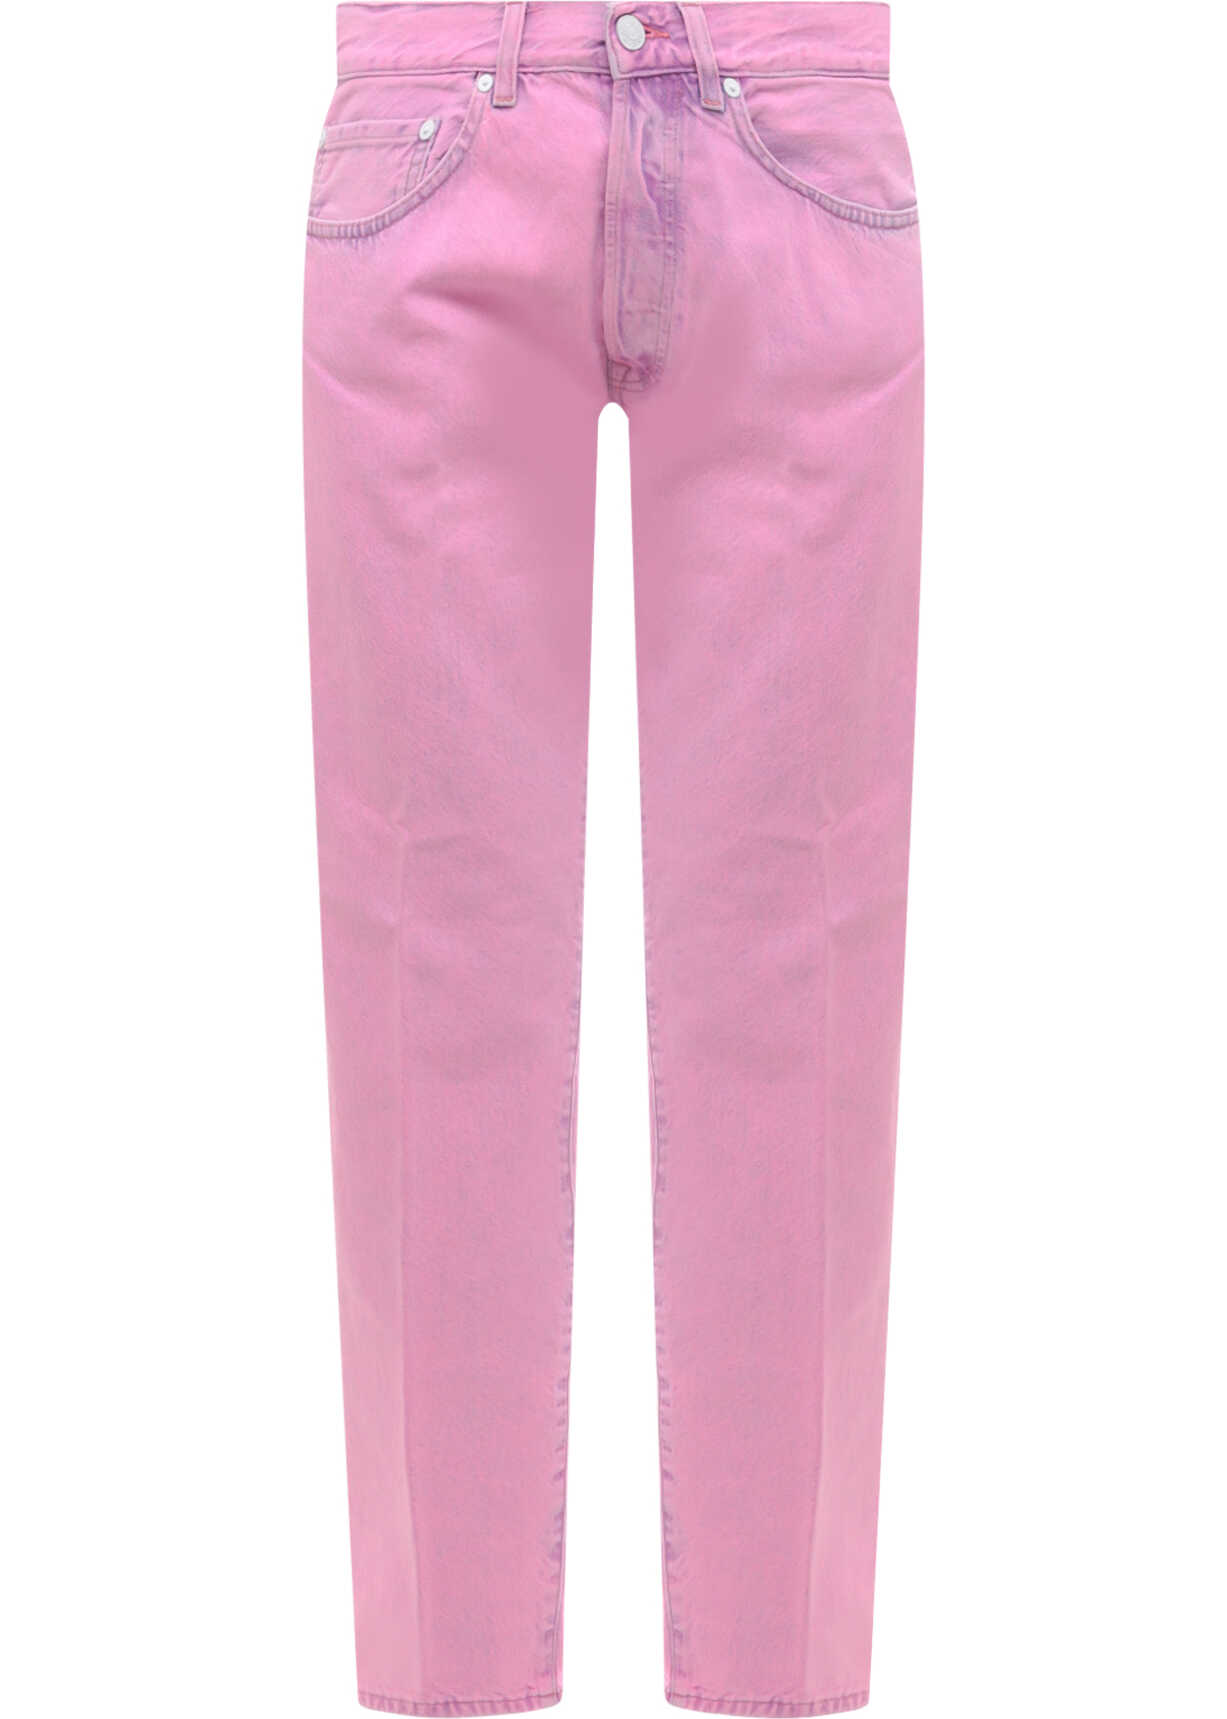 MADE IN TOMBOY Trouser Pink